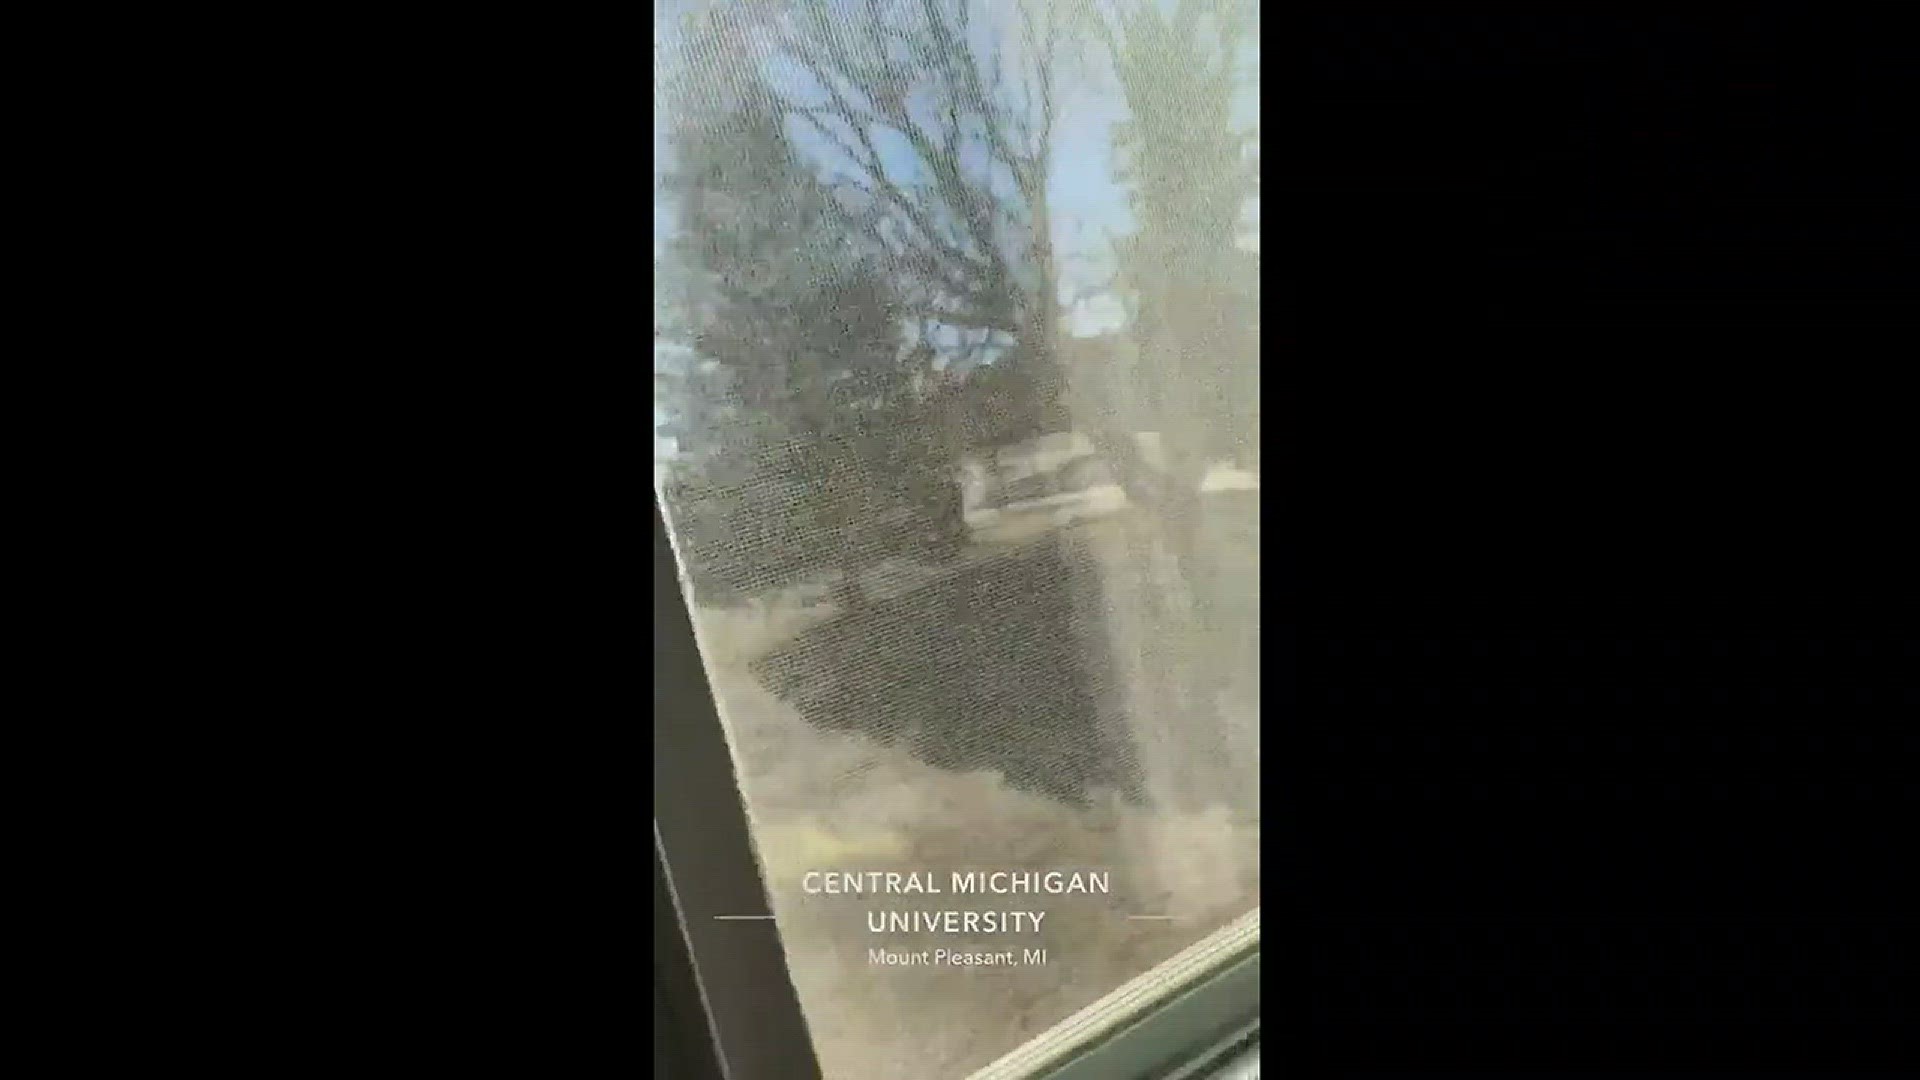 An audio recording is audible in this short clip from @Oliviaps17 at CMU Friday morning, March 2, 2018.